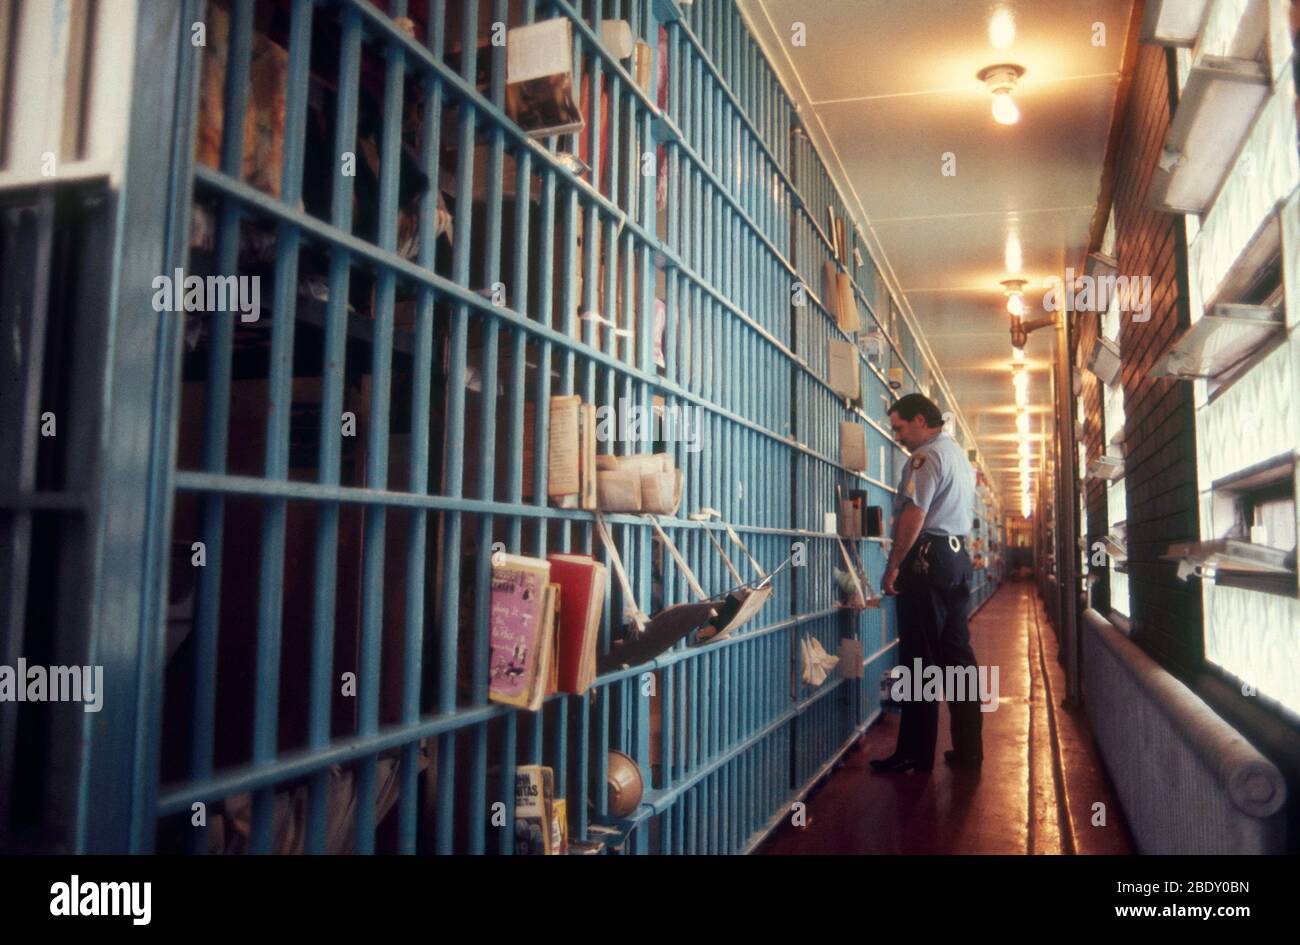 Cook County Jail, Chicago Stock Photo